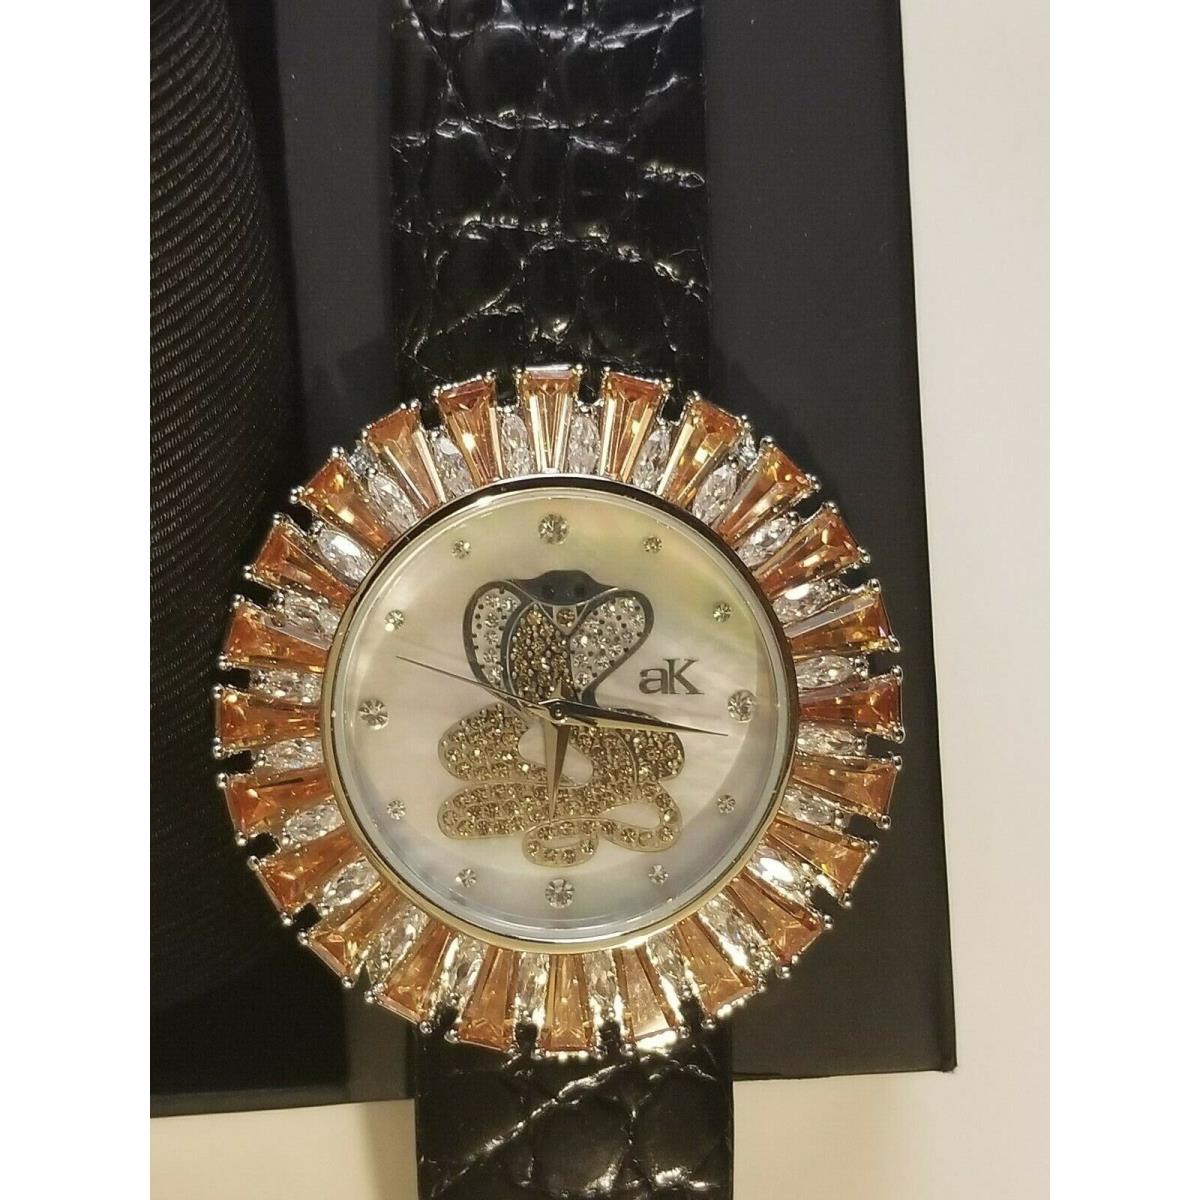 Cobra in Mother of Pearl Dial Watch by Adee Kaye with Yellow Austrian Crystals